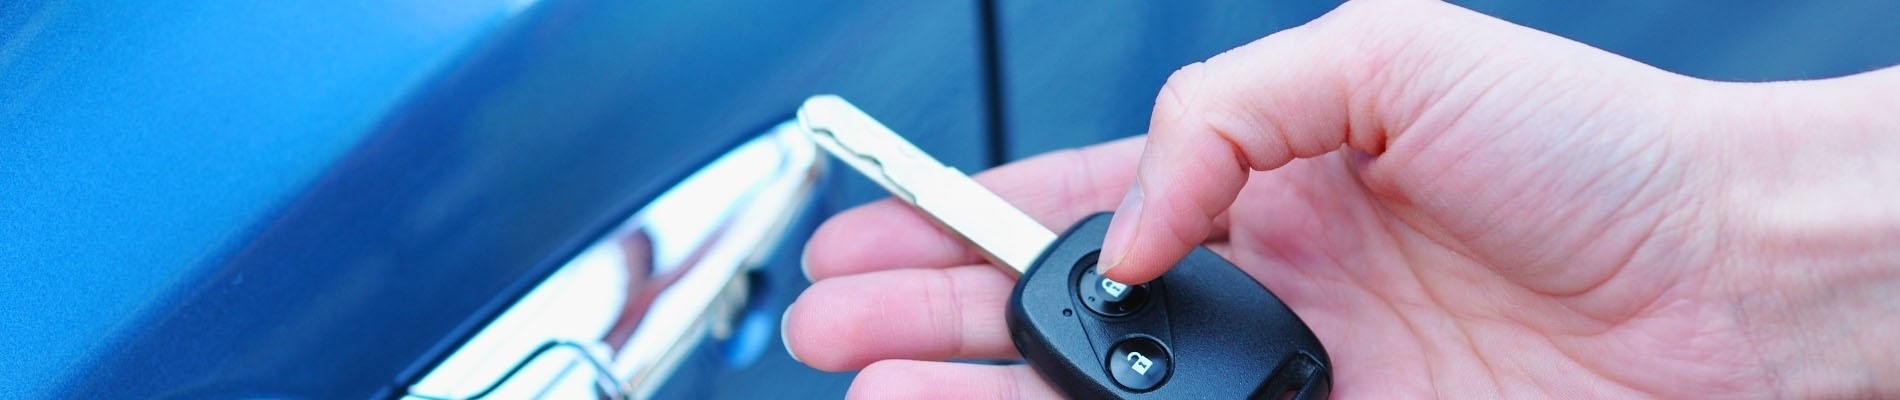 Car Keys Replacement & Ignition Repair Services On Site for Most Makes & Models.